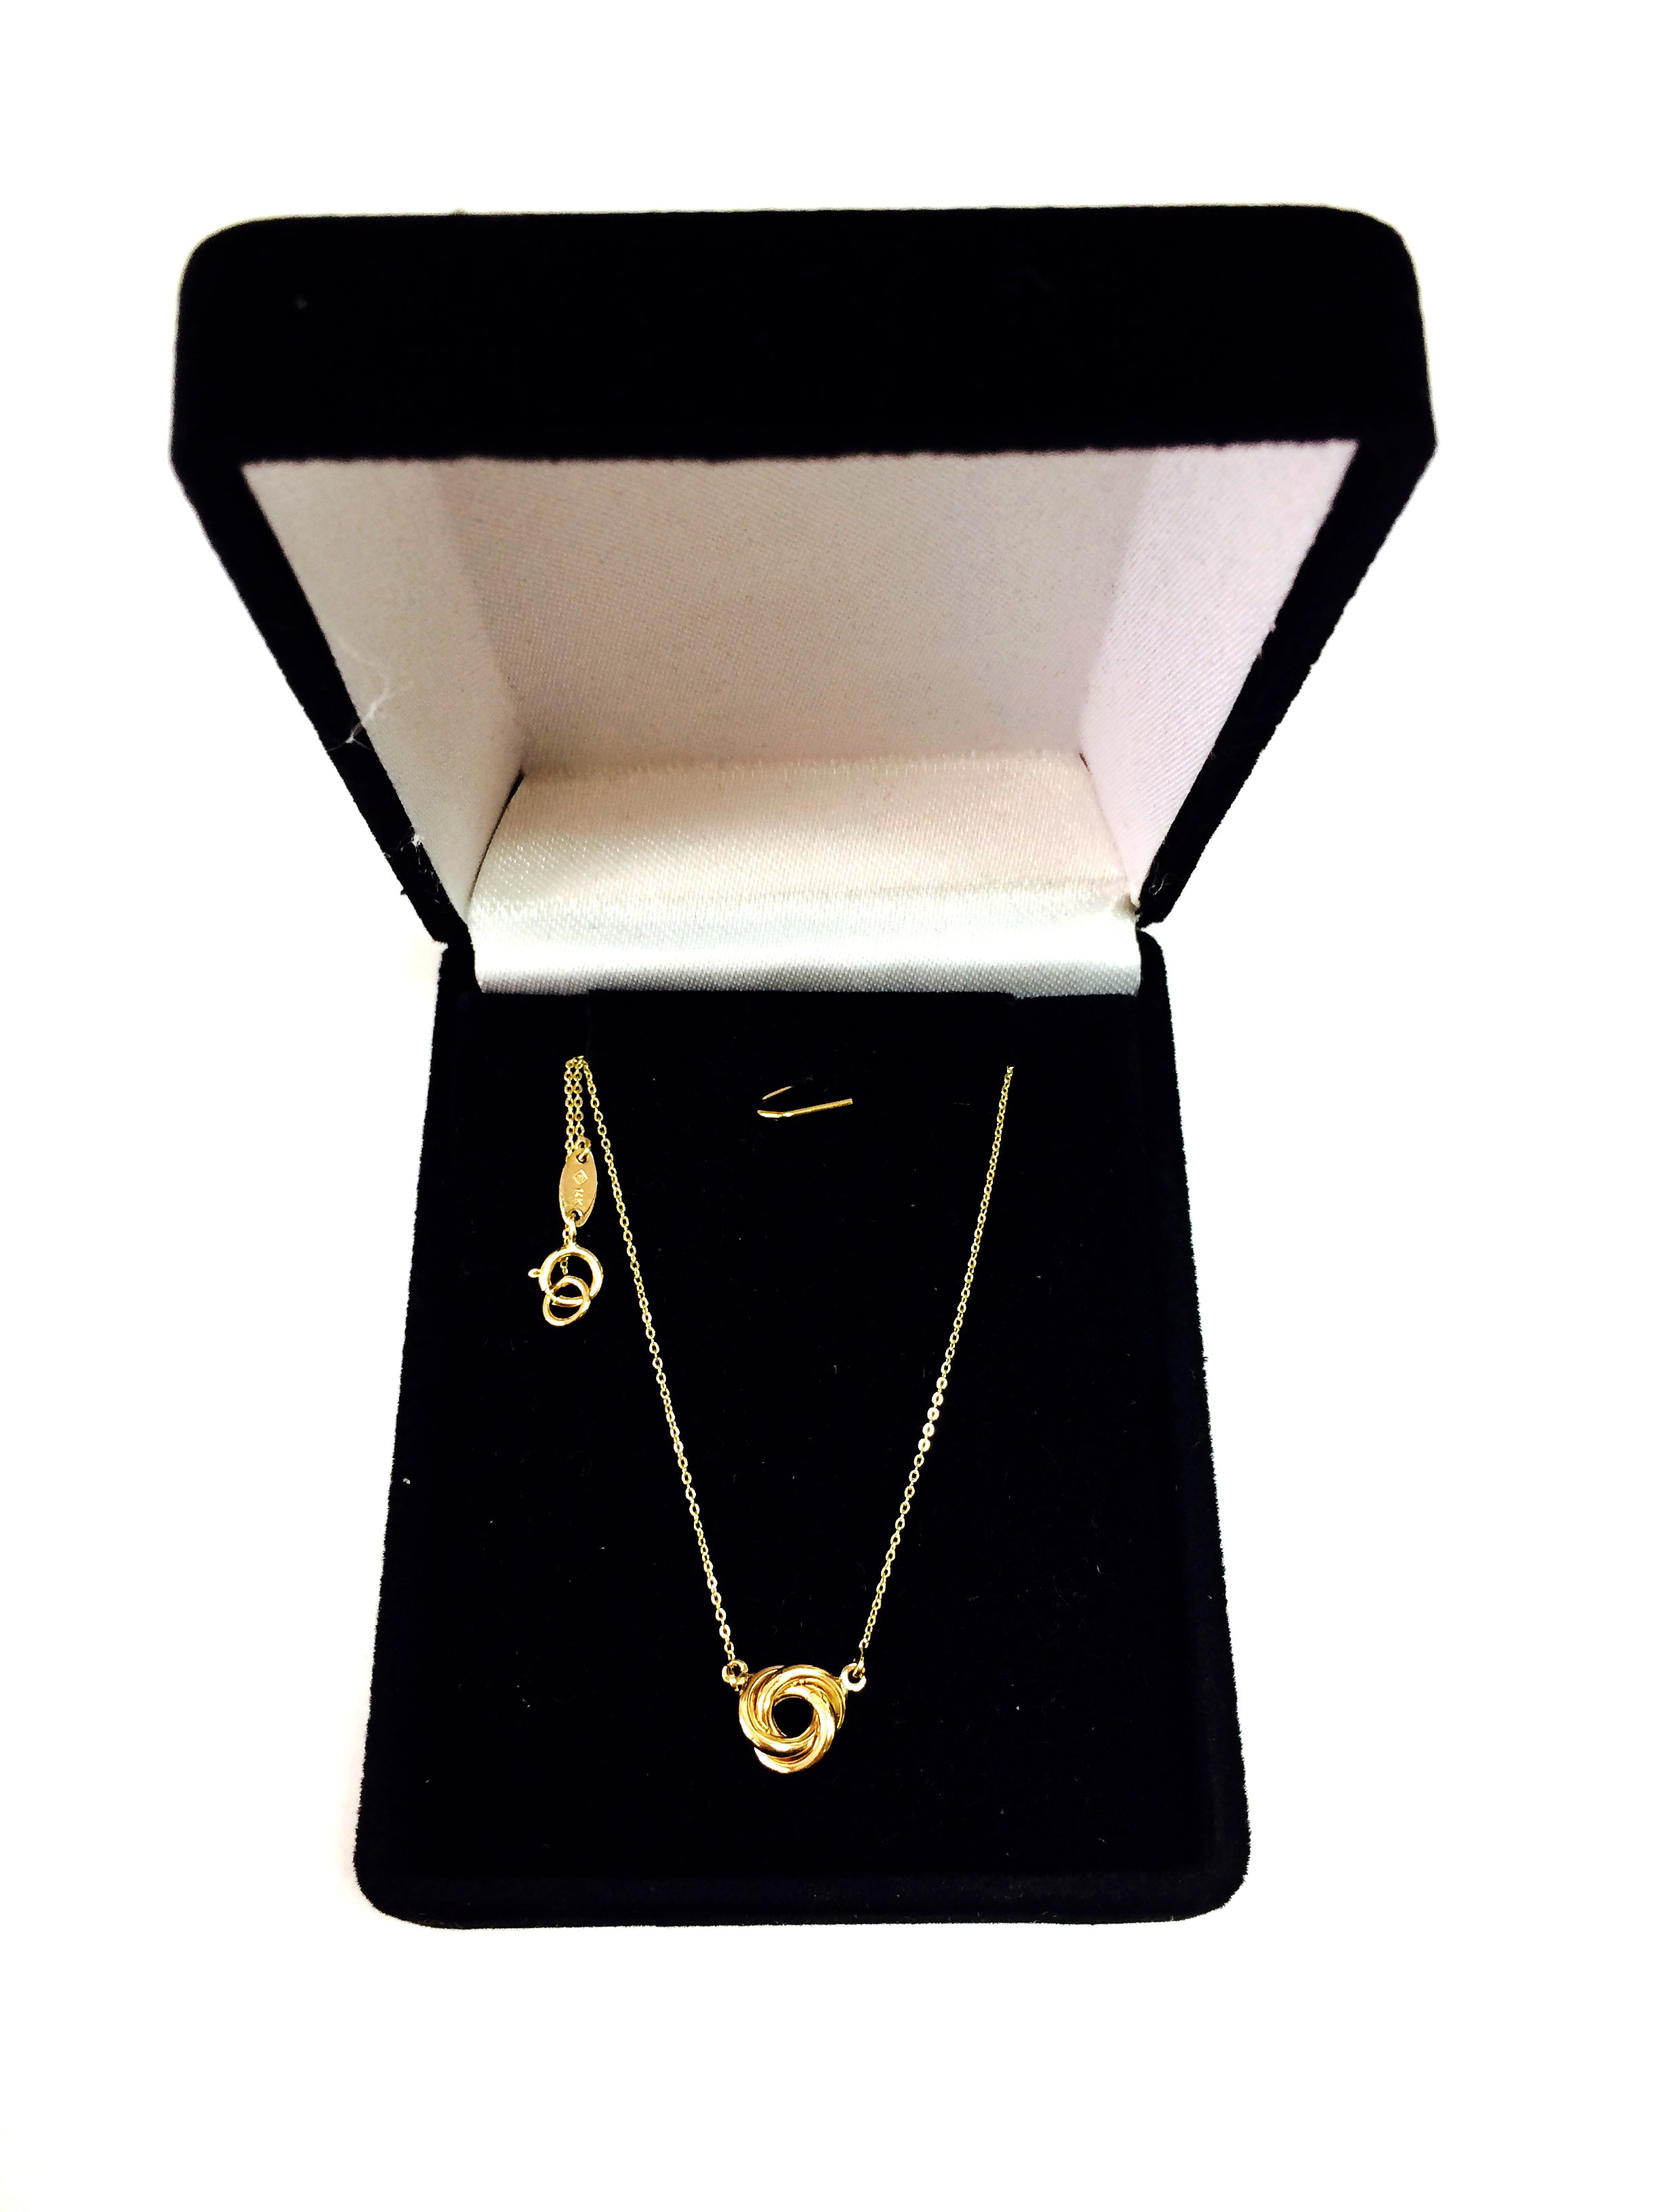 14K Yellow Gold Love Knot Pendant Necklace, 17"